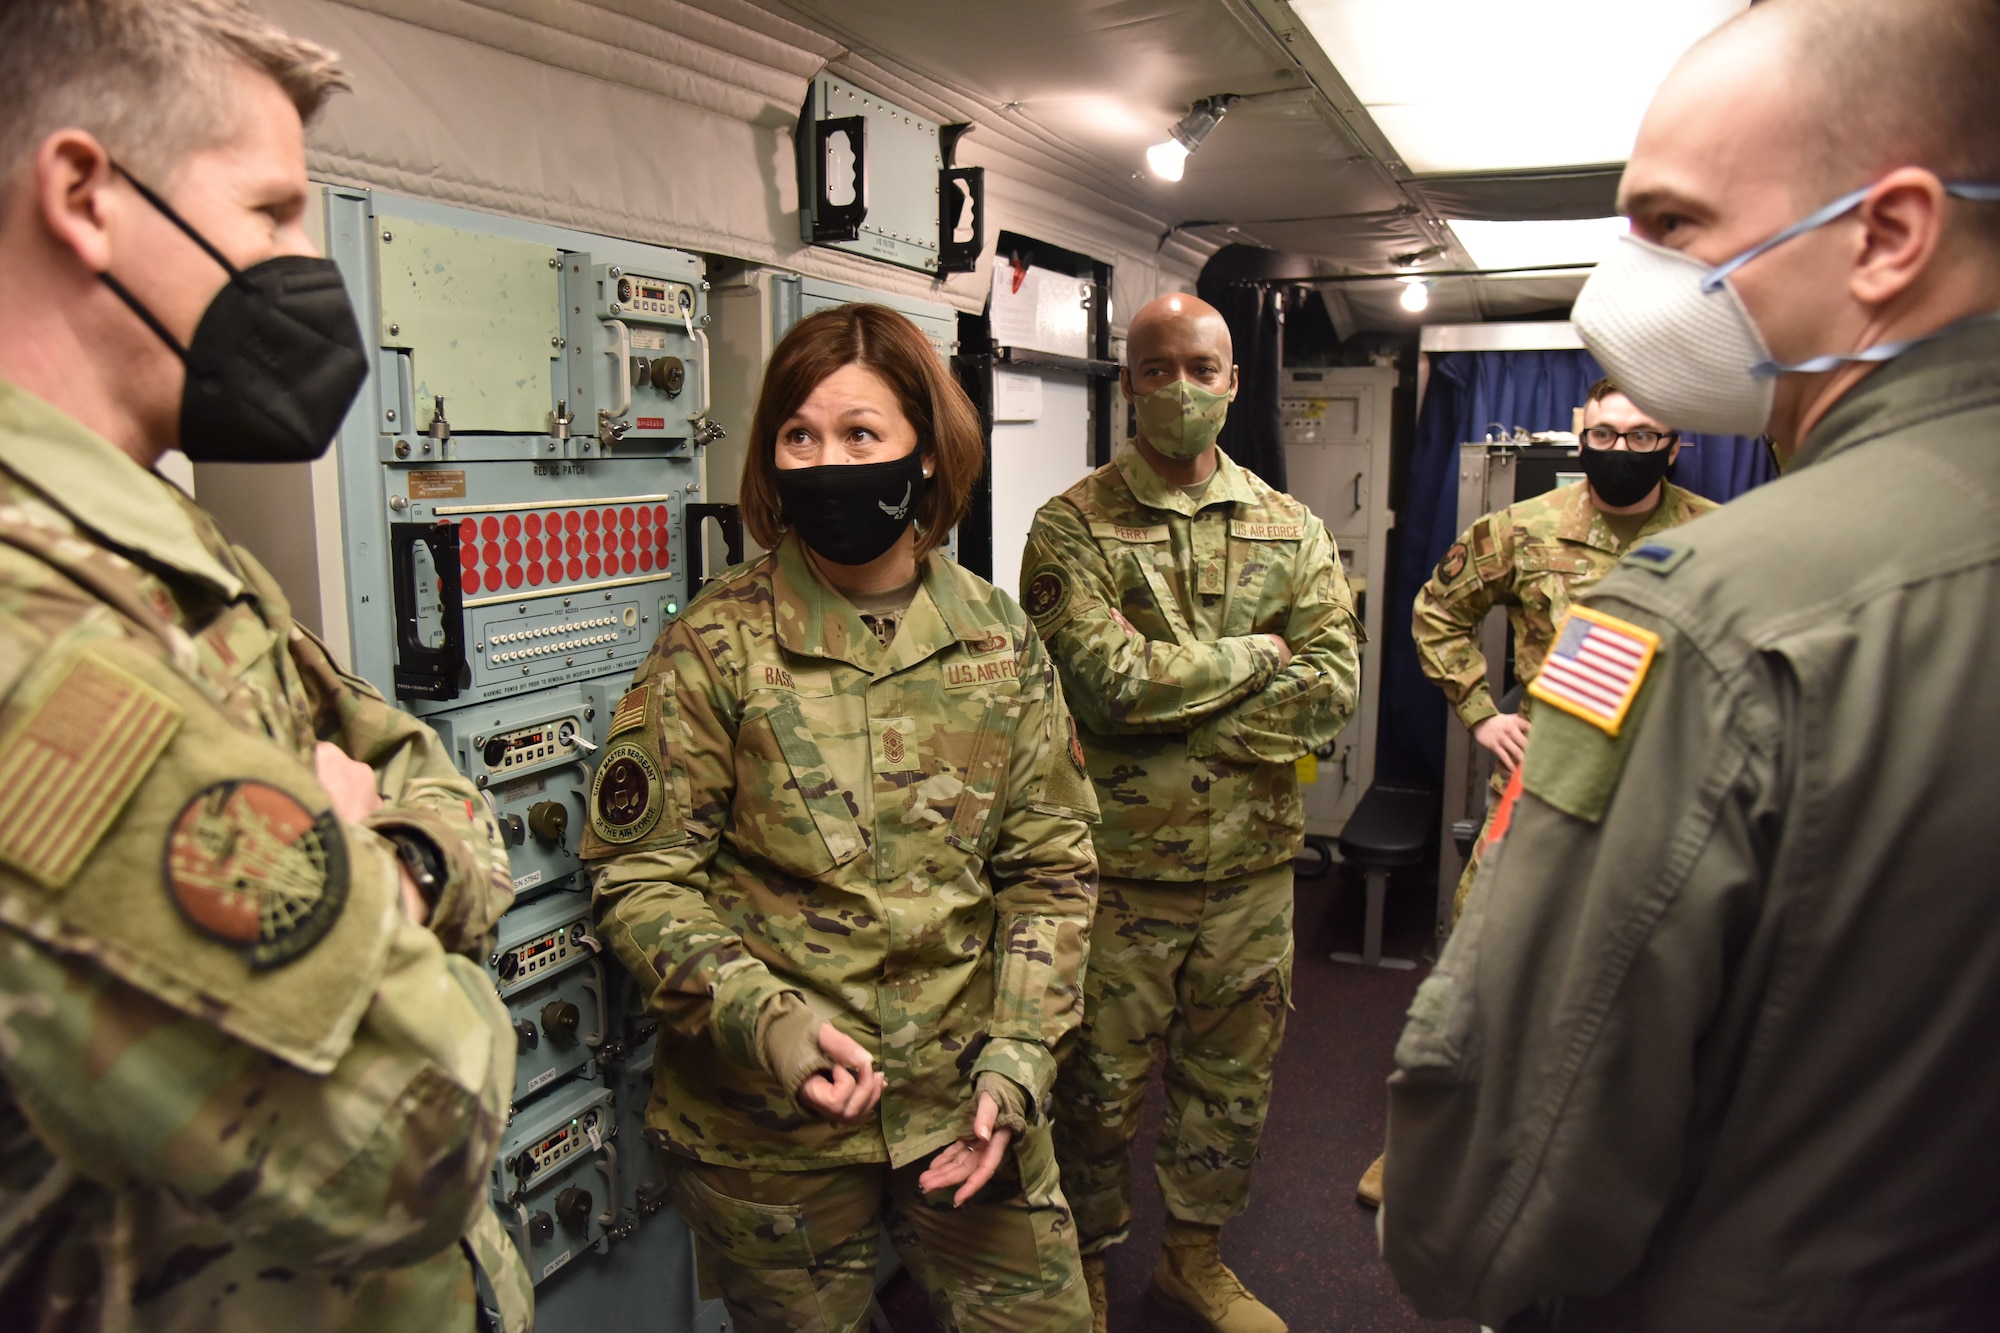 Chief Master Sgt. of the Air Force JoAnne S. Bass receives a launch control center tour from missileers during her tour of a missile alert facility Feb. 9, 2021, near Malmstrom Air Force Base, Mont. Missileers are responsible for potential launches of Minuteman III intercontinental ballistic missiles, the most responsive leg of the nuclear triad.